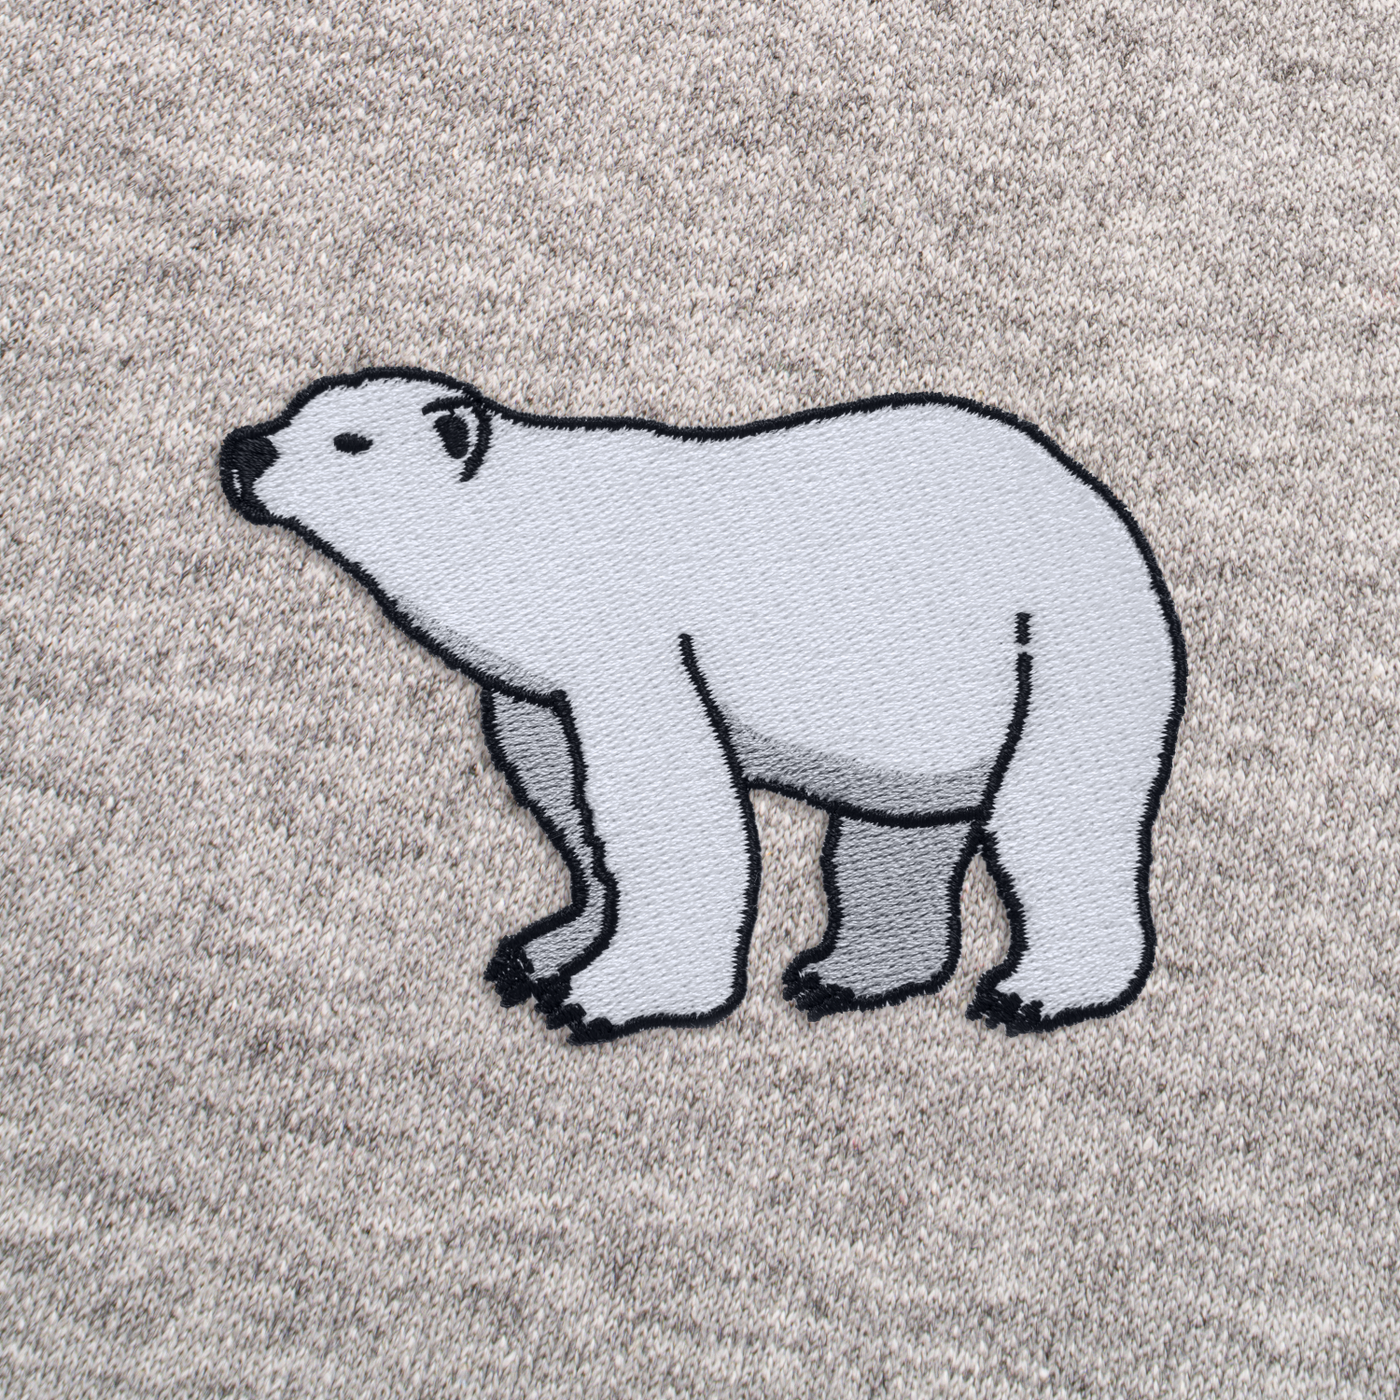 Bobby's Planet Men's Embroidered Polar Bear Sweatshirt from Arctic Polar Animals Collection in Sport Grey Color#color_sport-grey